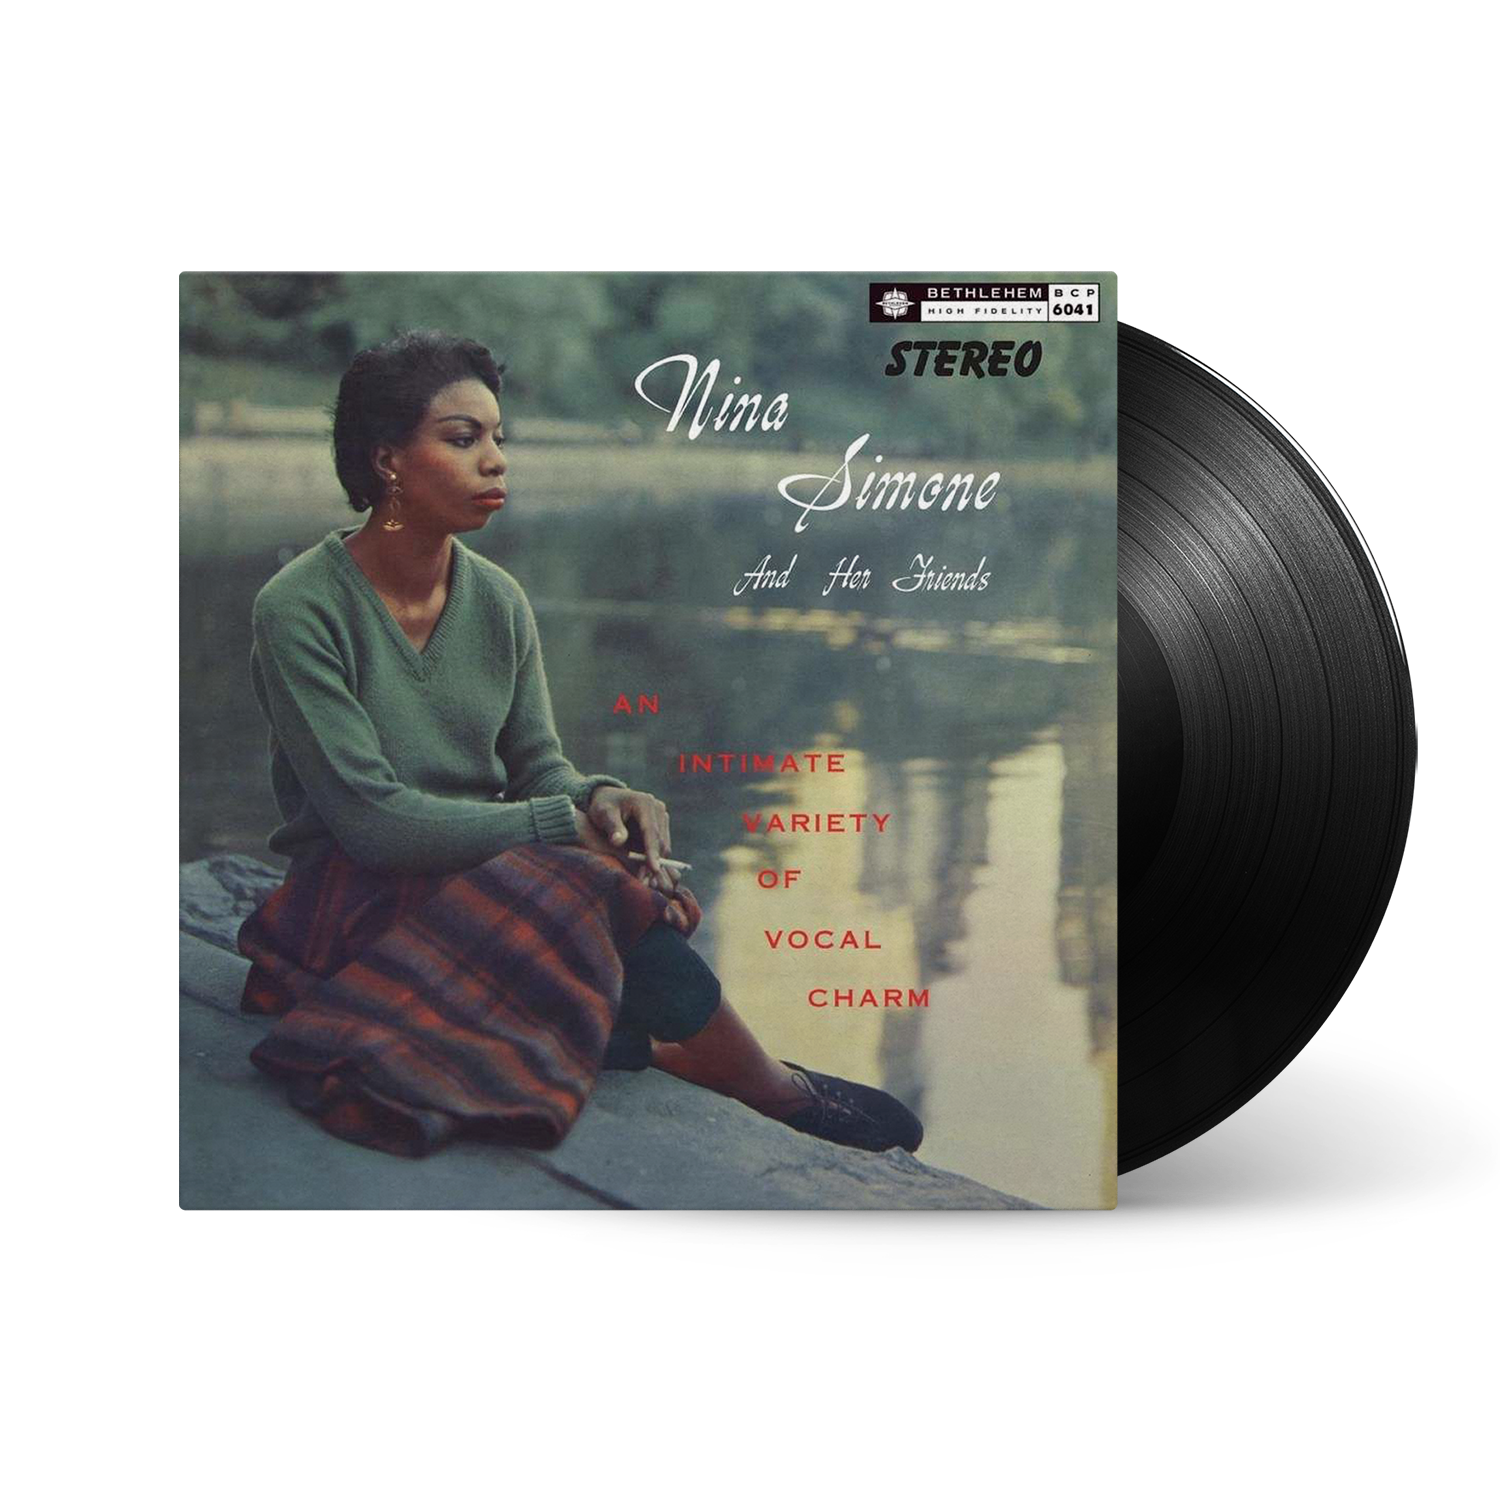 Nina Simone - Nina Simone - Nina Simone + Her Friends (2021 Stereo ...